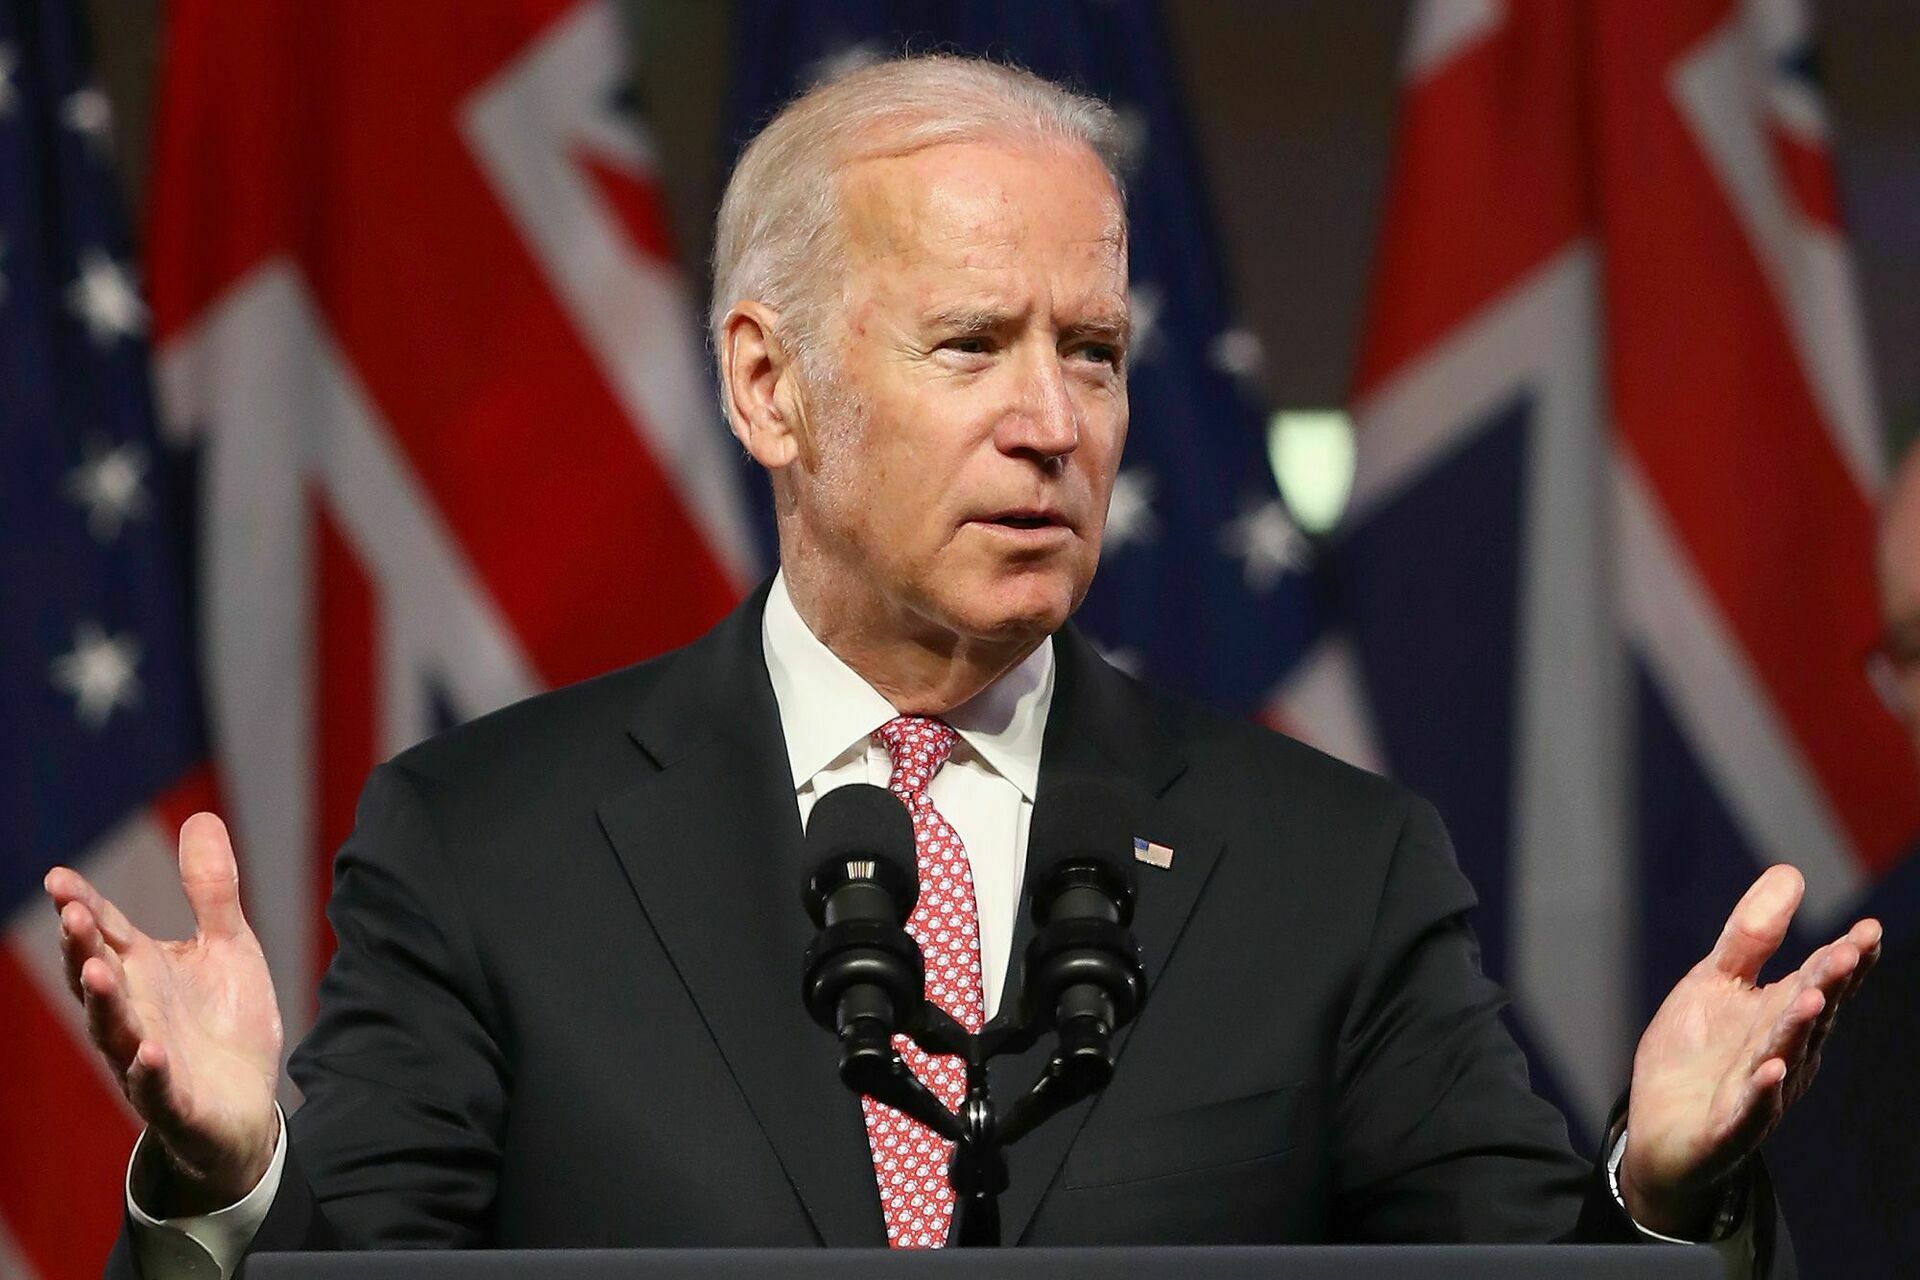 Biden on the absence of Trump's statement in the Navalny case: "Silence is complicity"